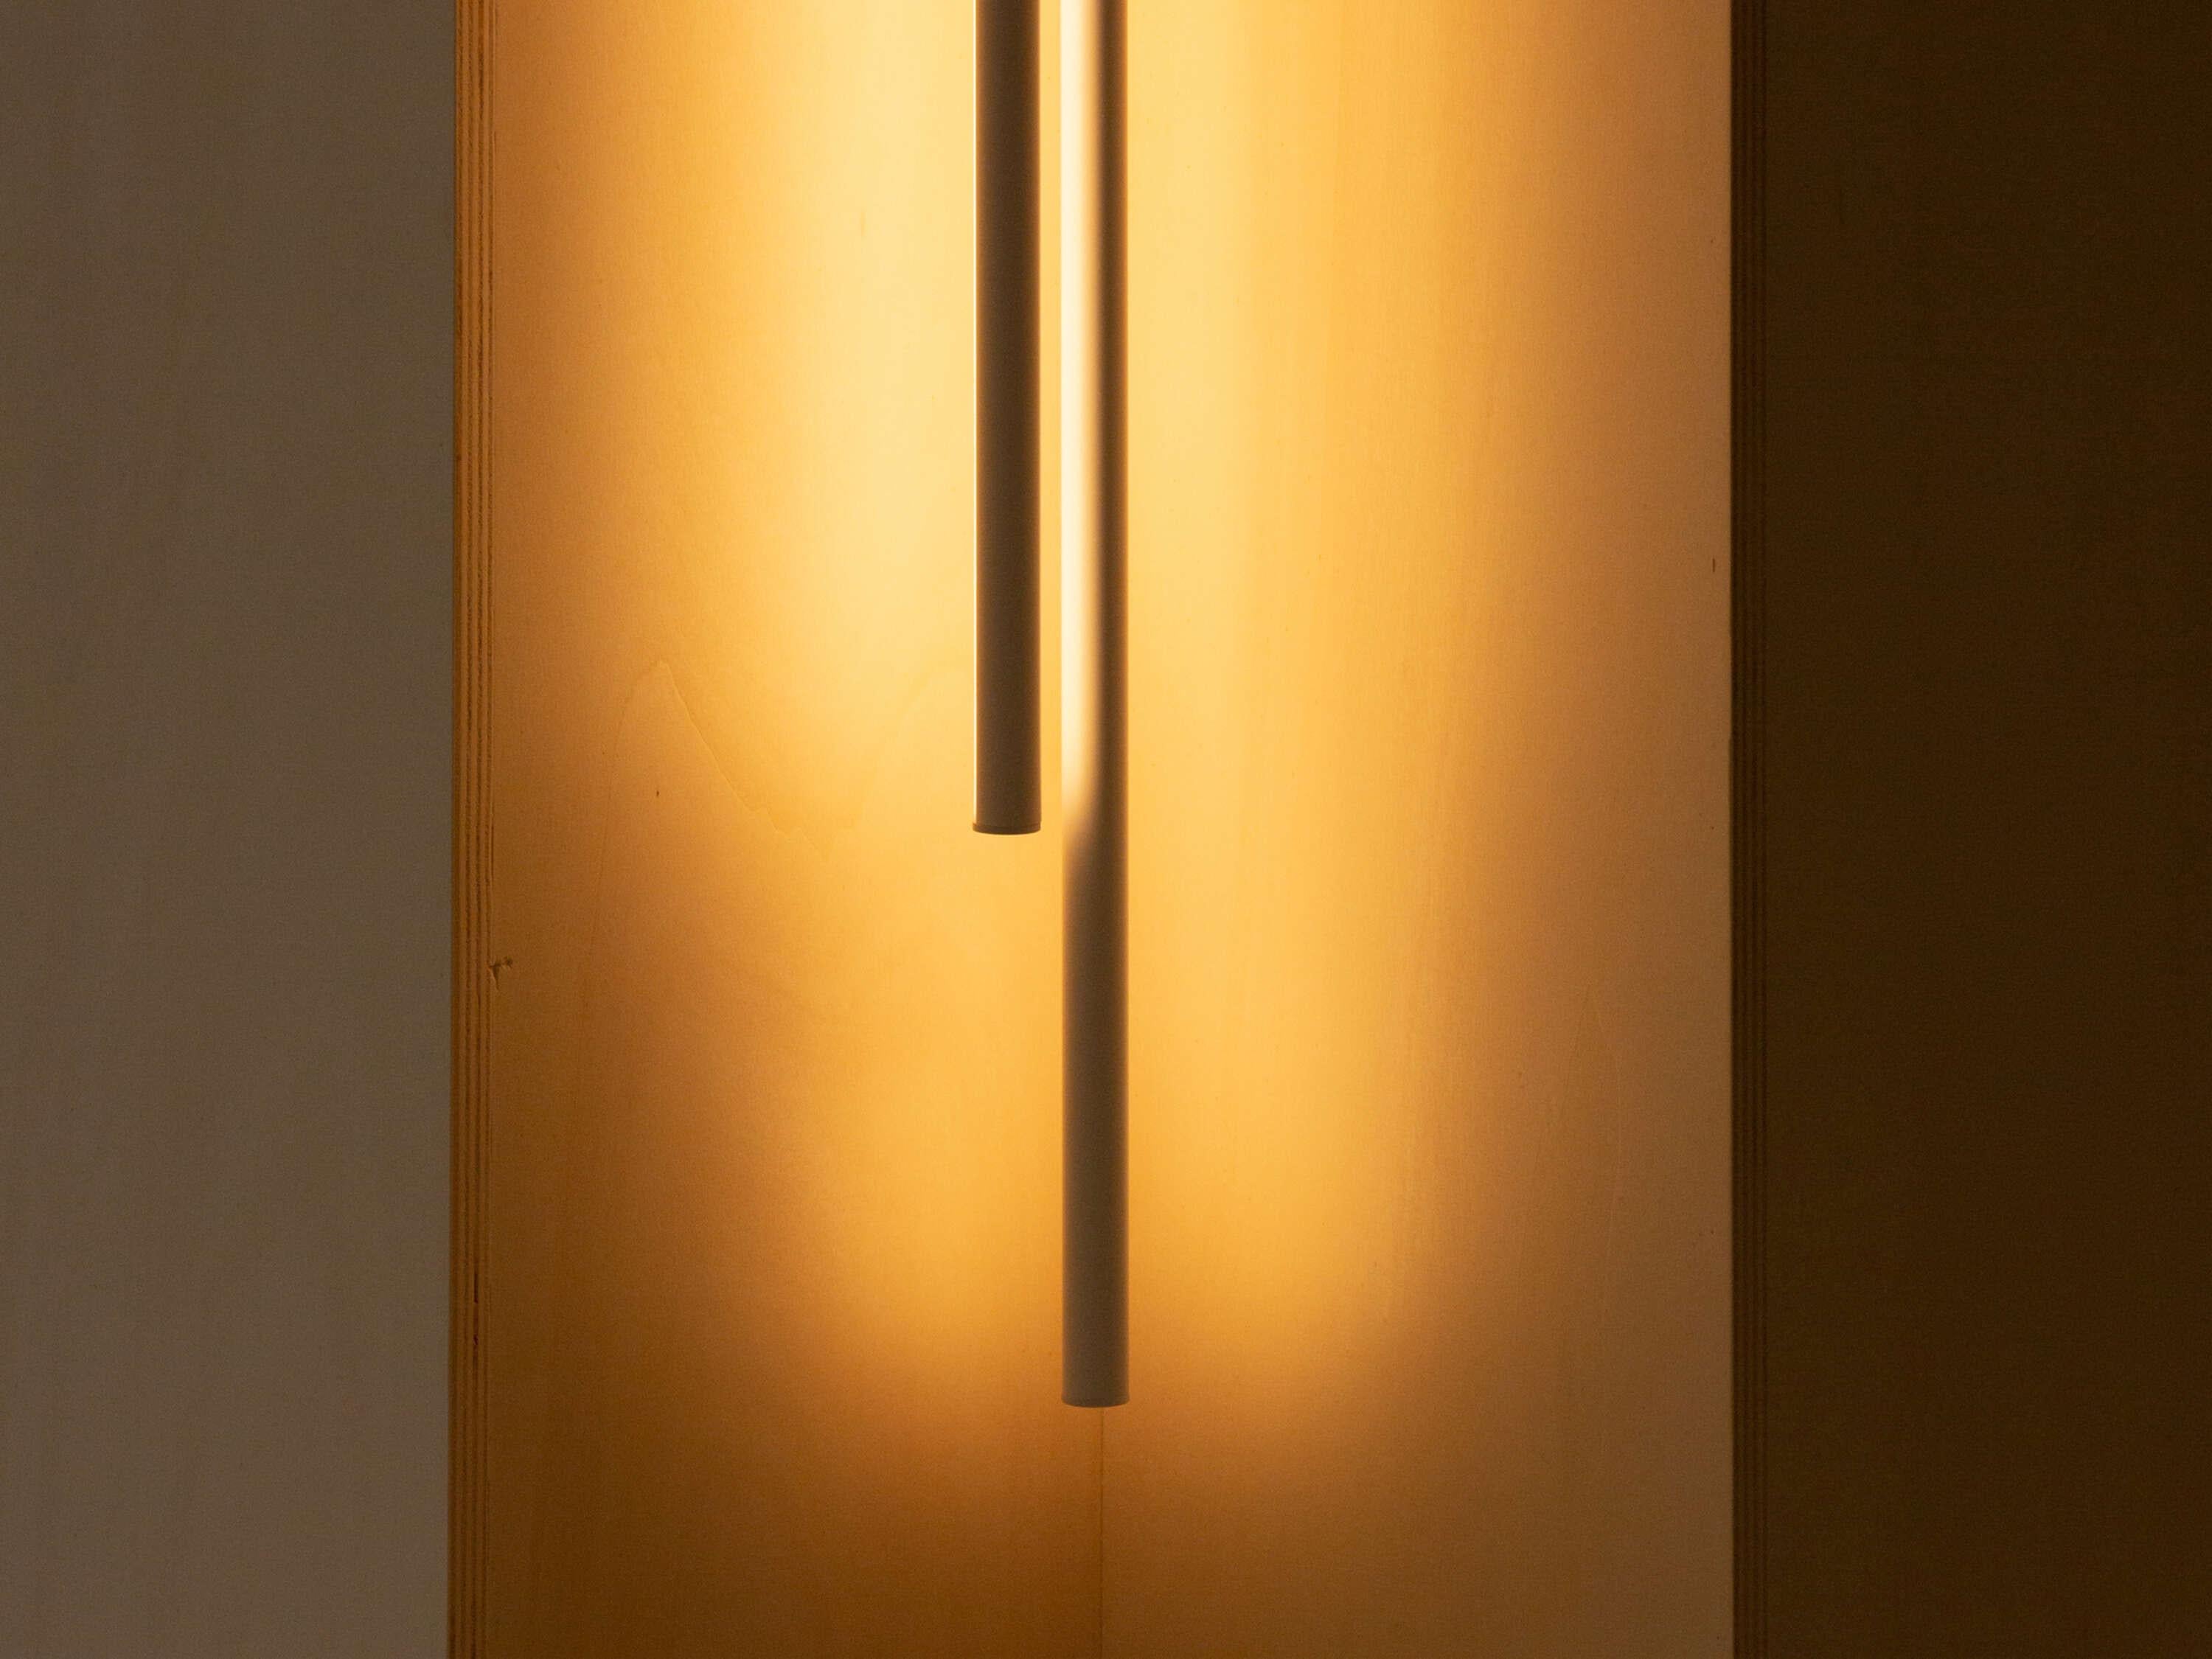 Flos My Lines Suspended Lamp in Anodized Aluminum and Matt White Color by Michael Anastassiades

My Lines is a suspended lamp with diffused light composed of two vertical bars that can be oriented, attached to a canopy with matte white finish. Each